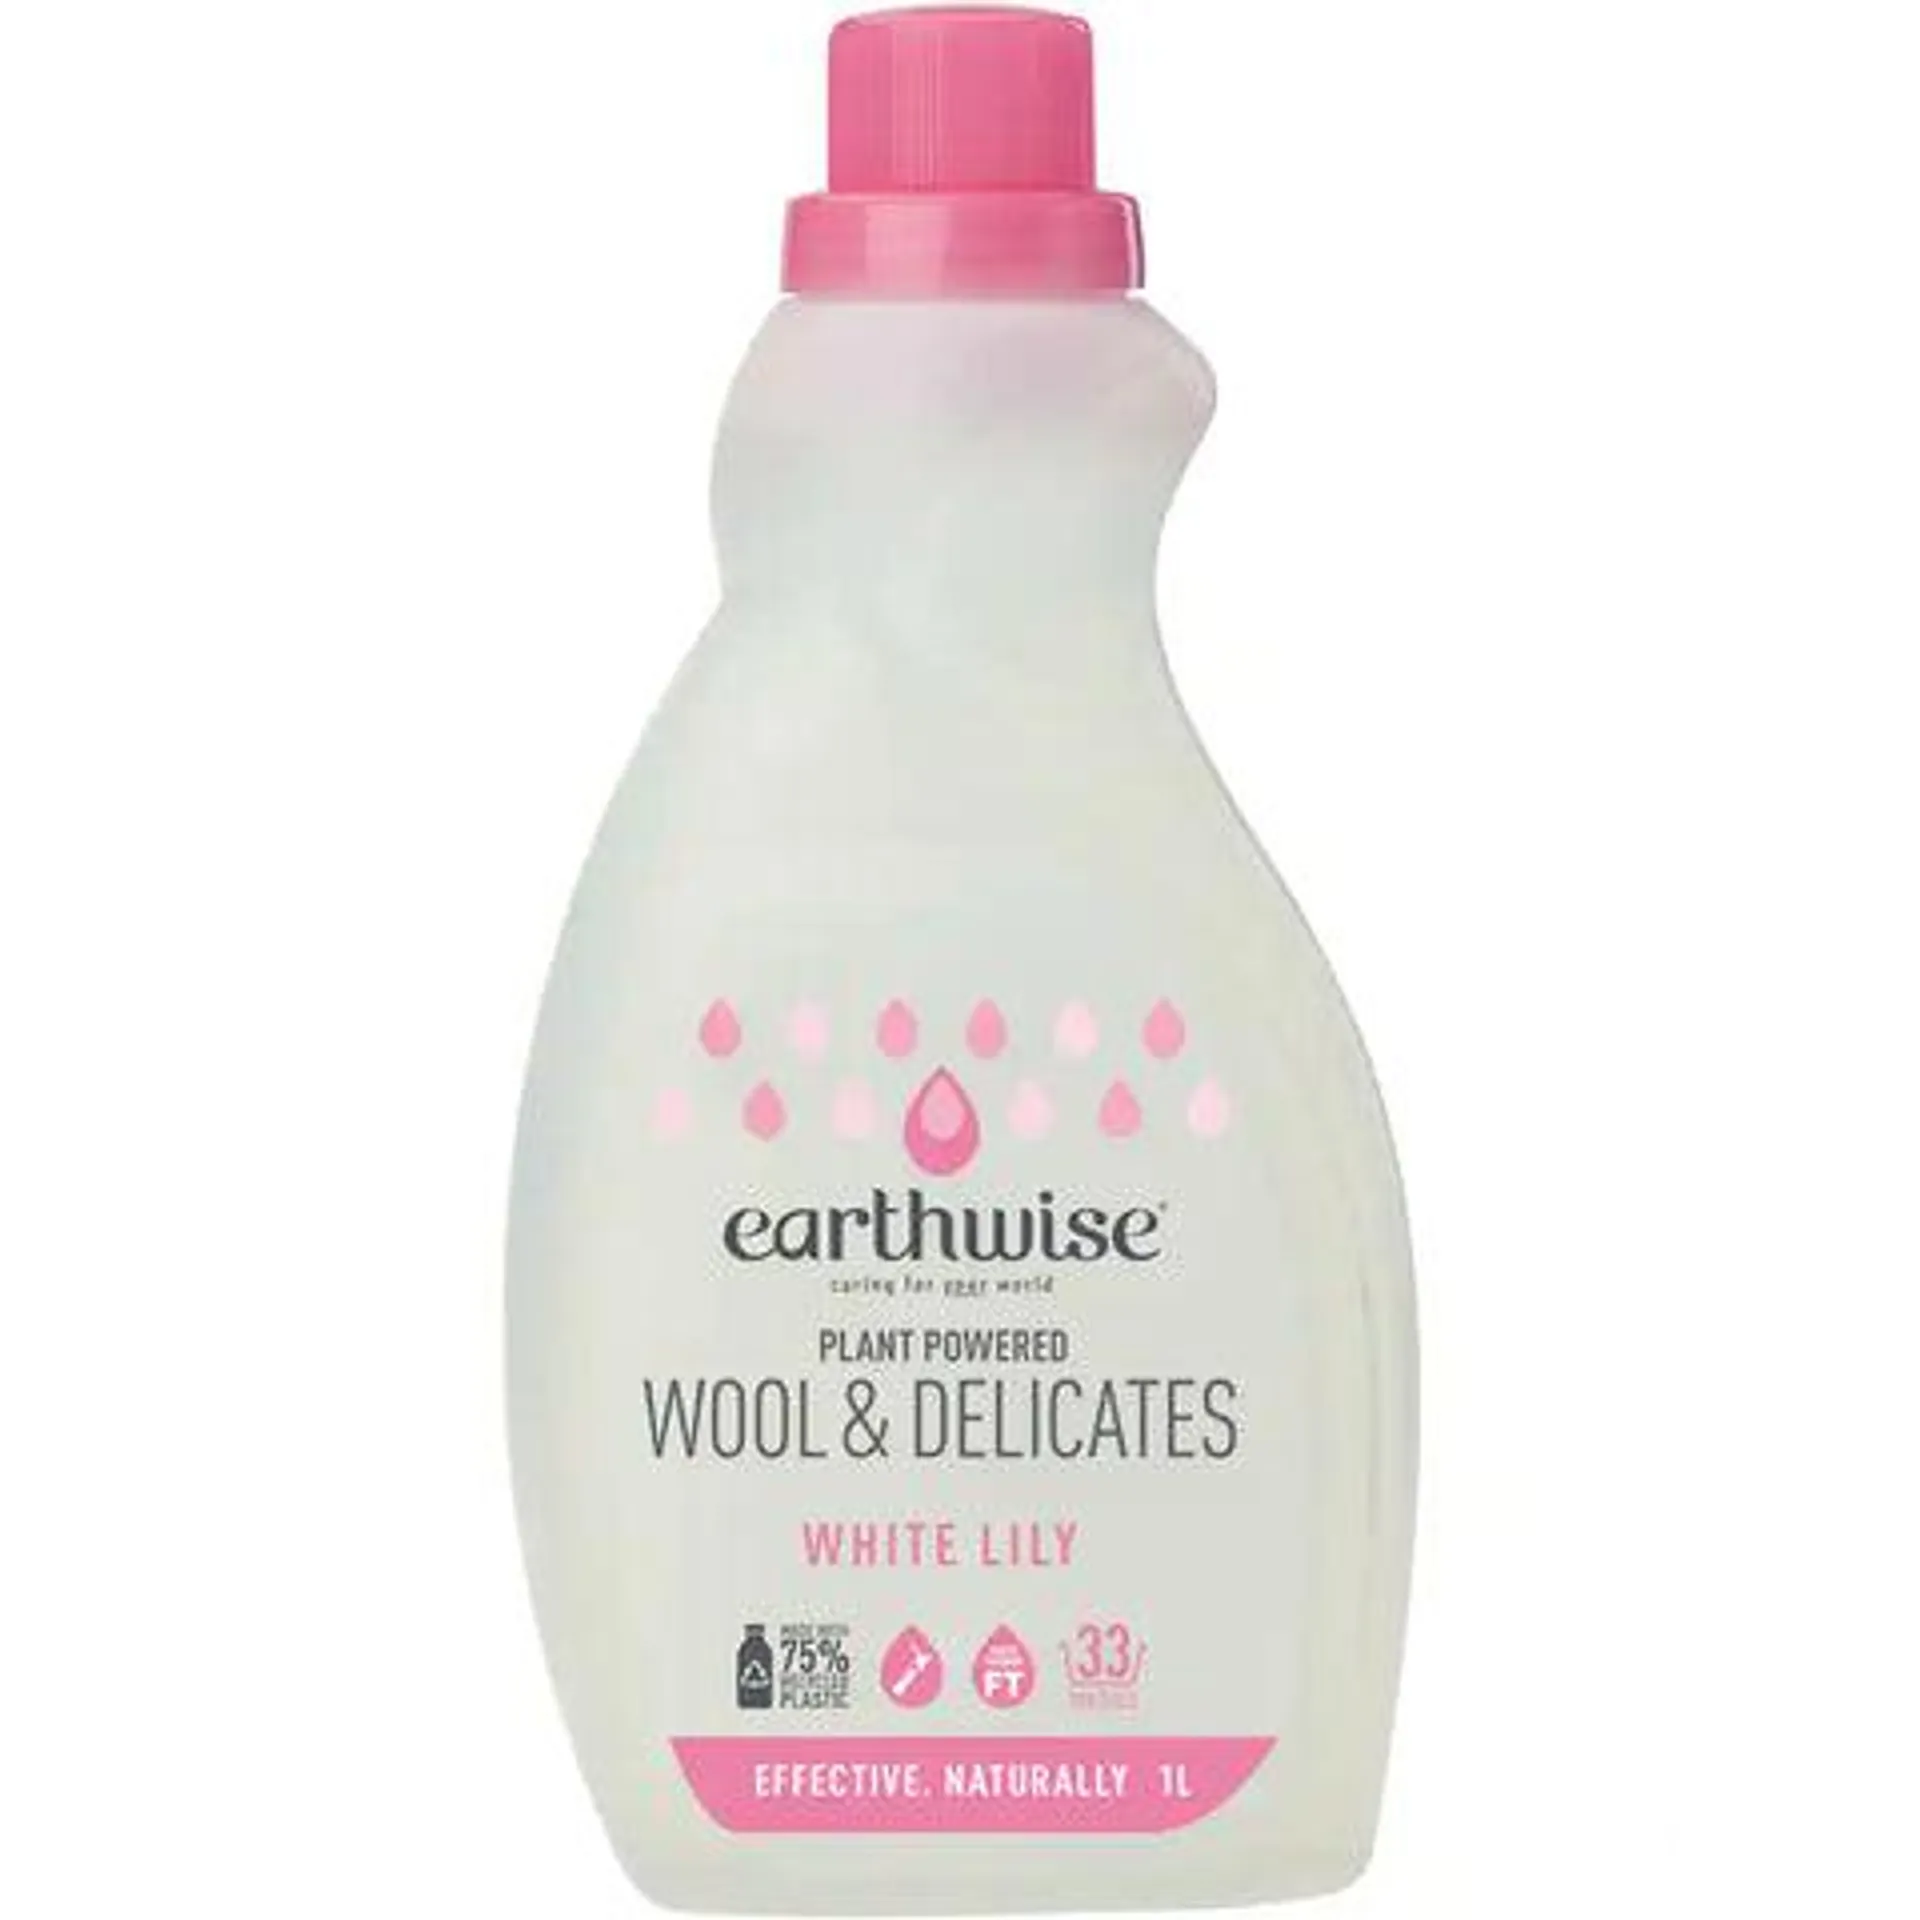 Earthwise Fabric Softener Sensitive White Lily 1L